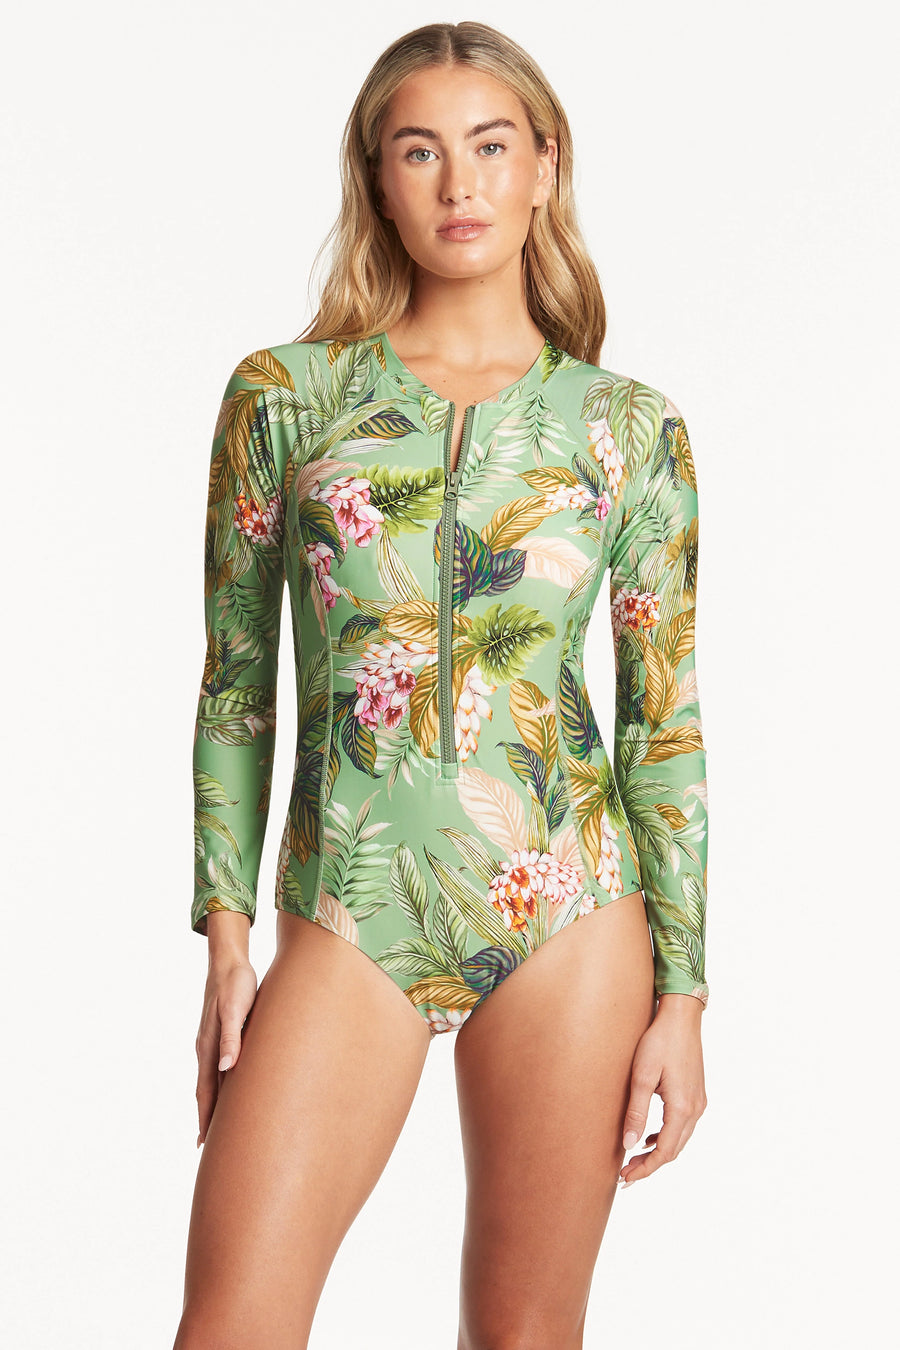 SEA LEVEL ONE PIECE - LOST PARADISE L/S MULTIFIT ONE PIECE / GREEN